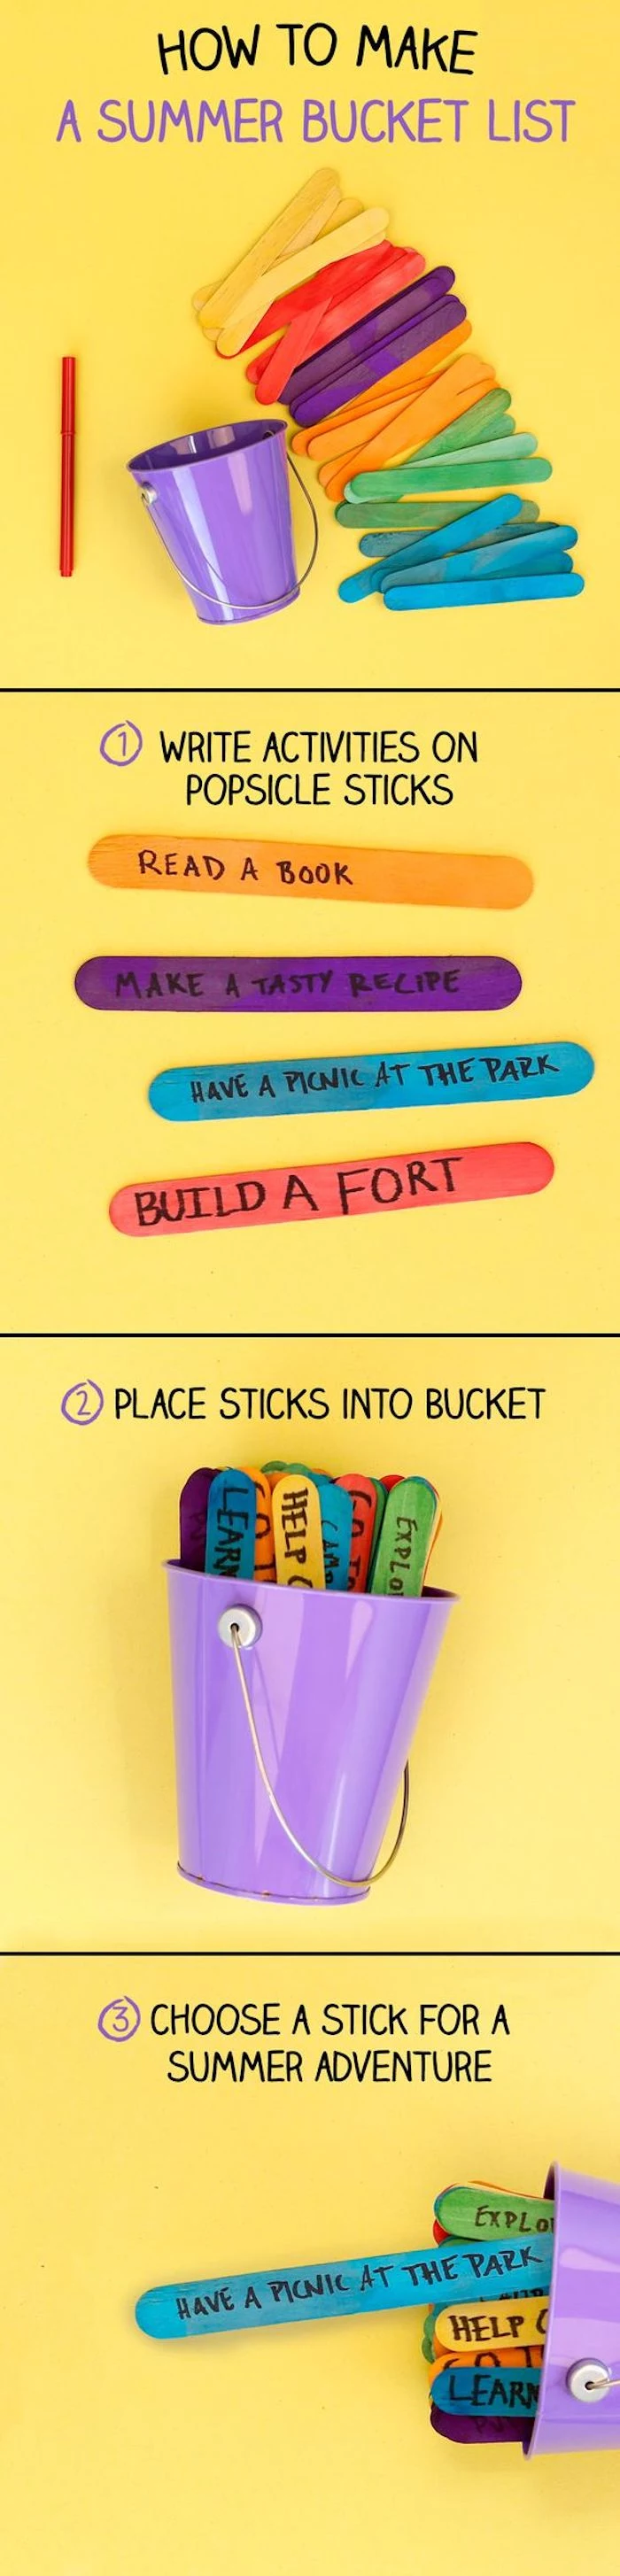 how to make a summer bucket list, diy things to do when bored, popsicle sticks, metal purple bucket